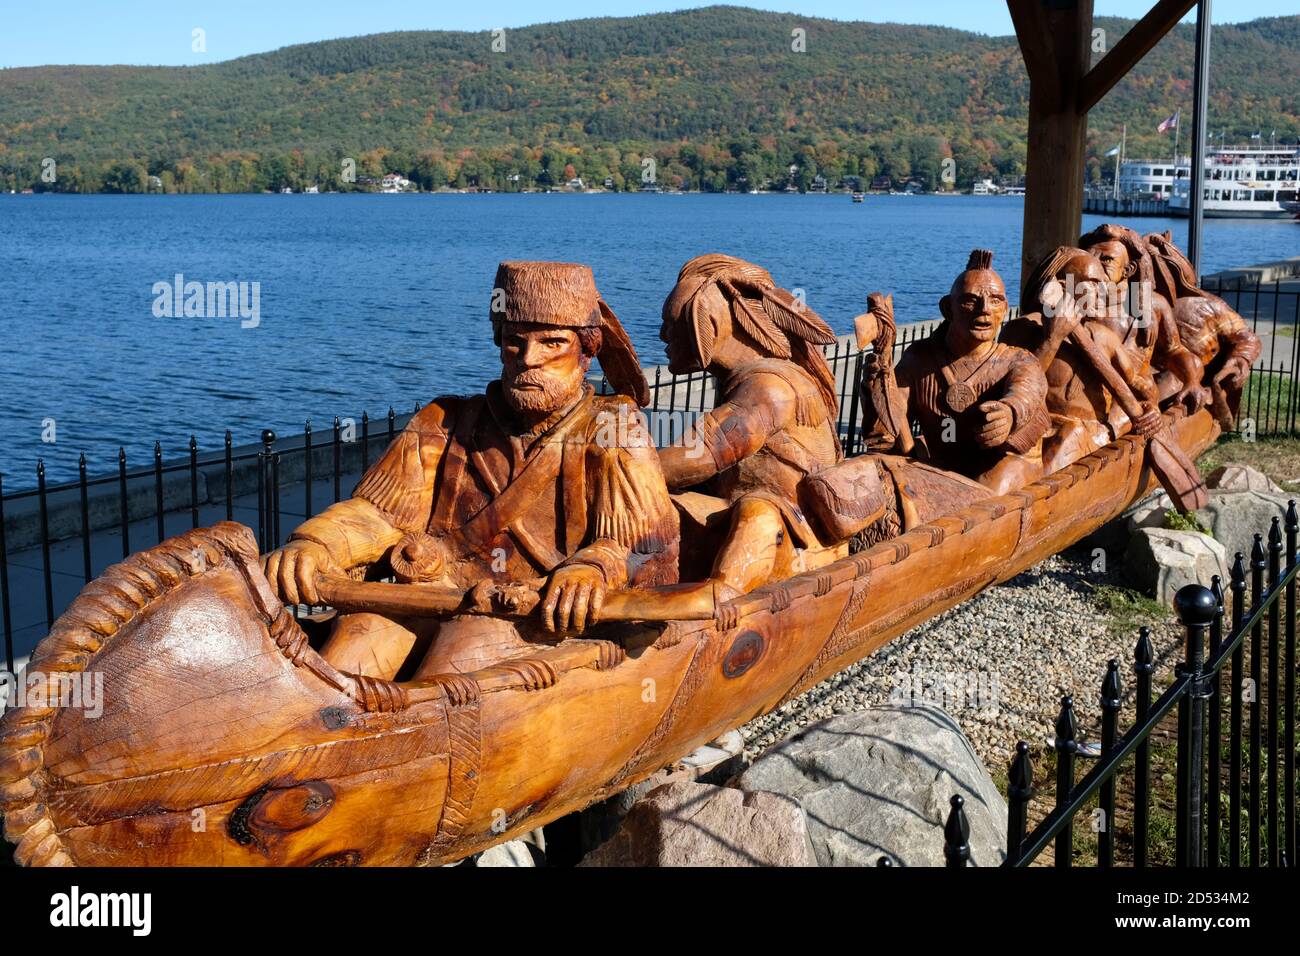 Canoe sculpture depicts Robert Rogers and five Mohicans paddling a birch-bark style canoe in Lake George, NY. Carved by Paul Stark Stock Photo